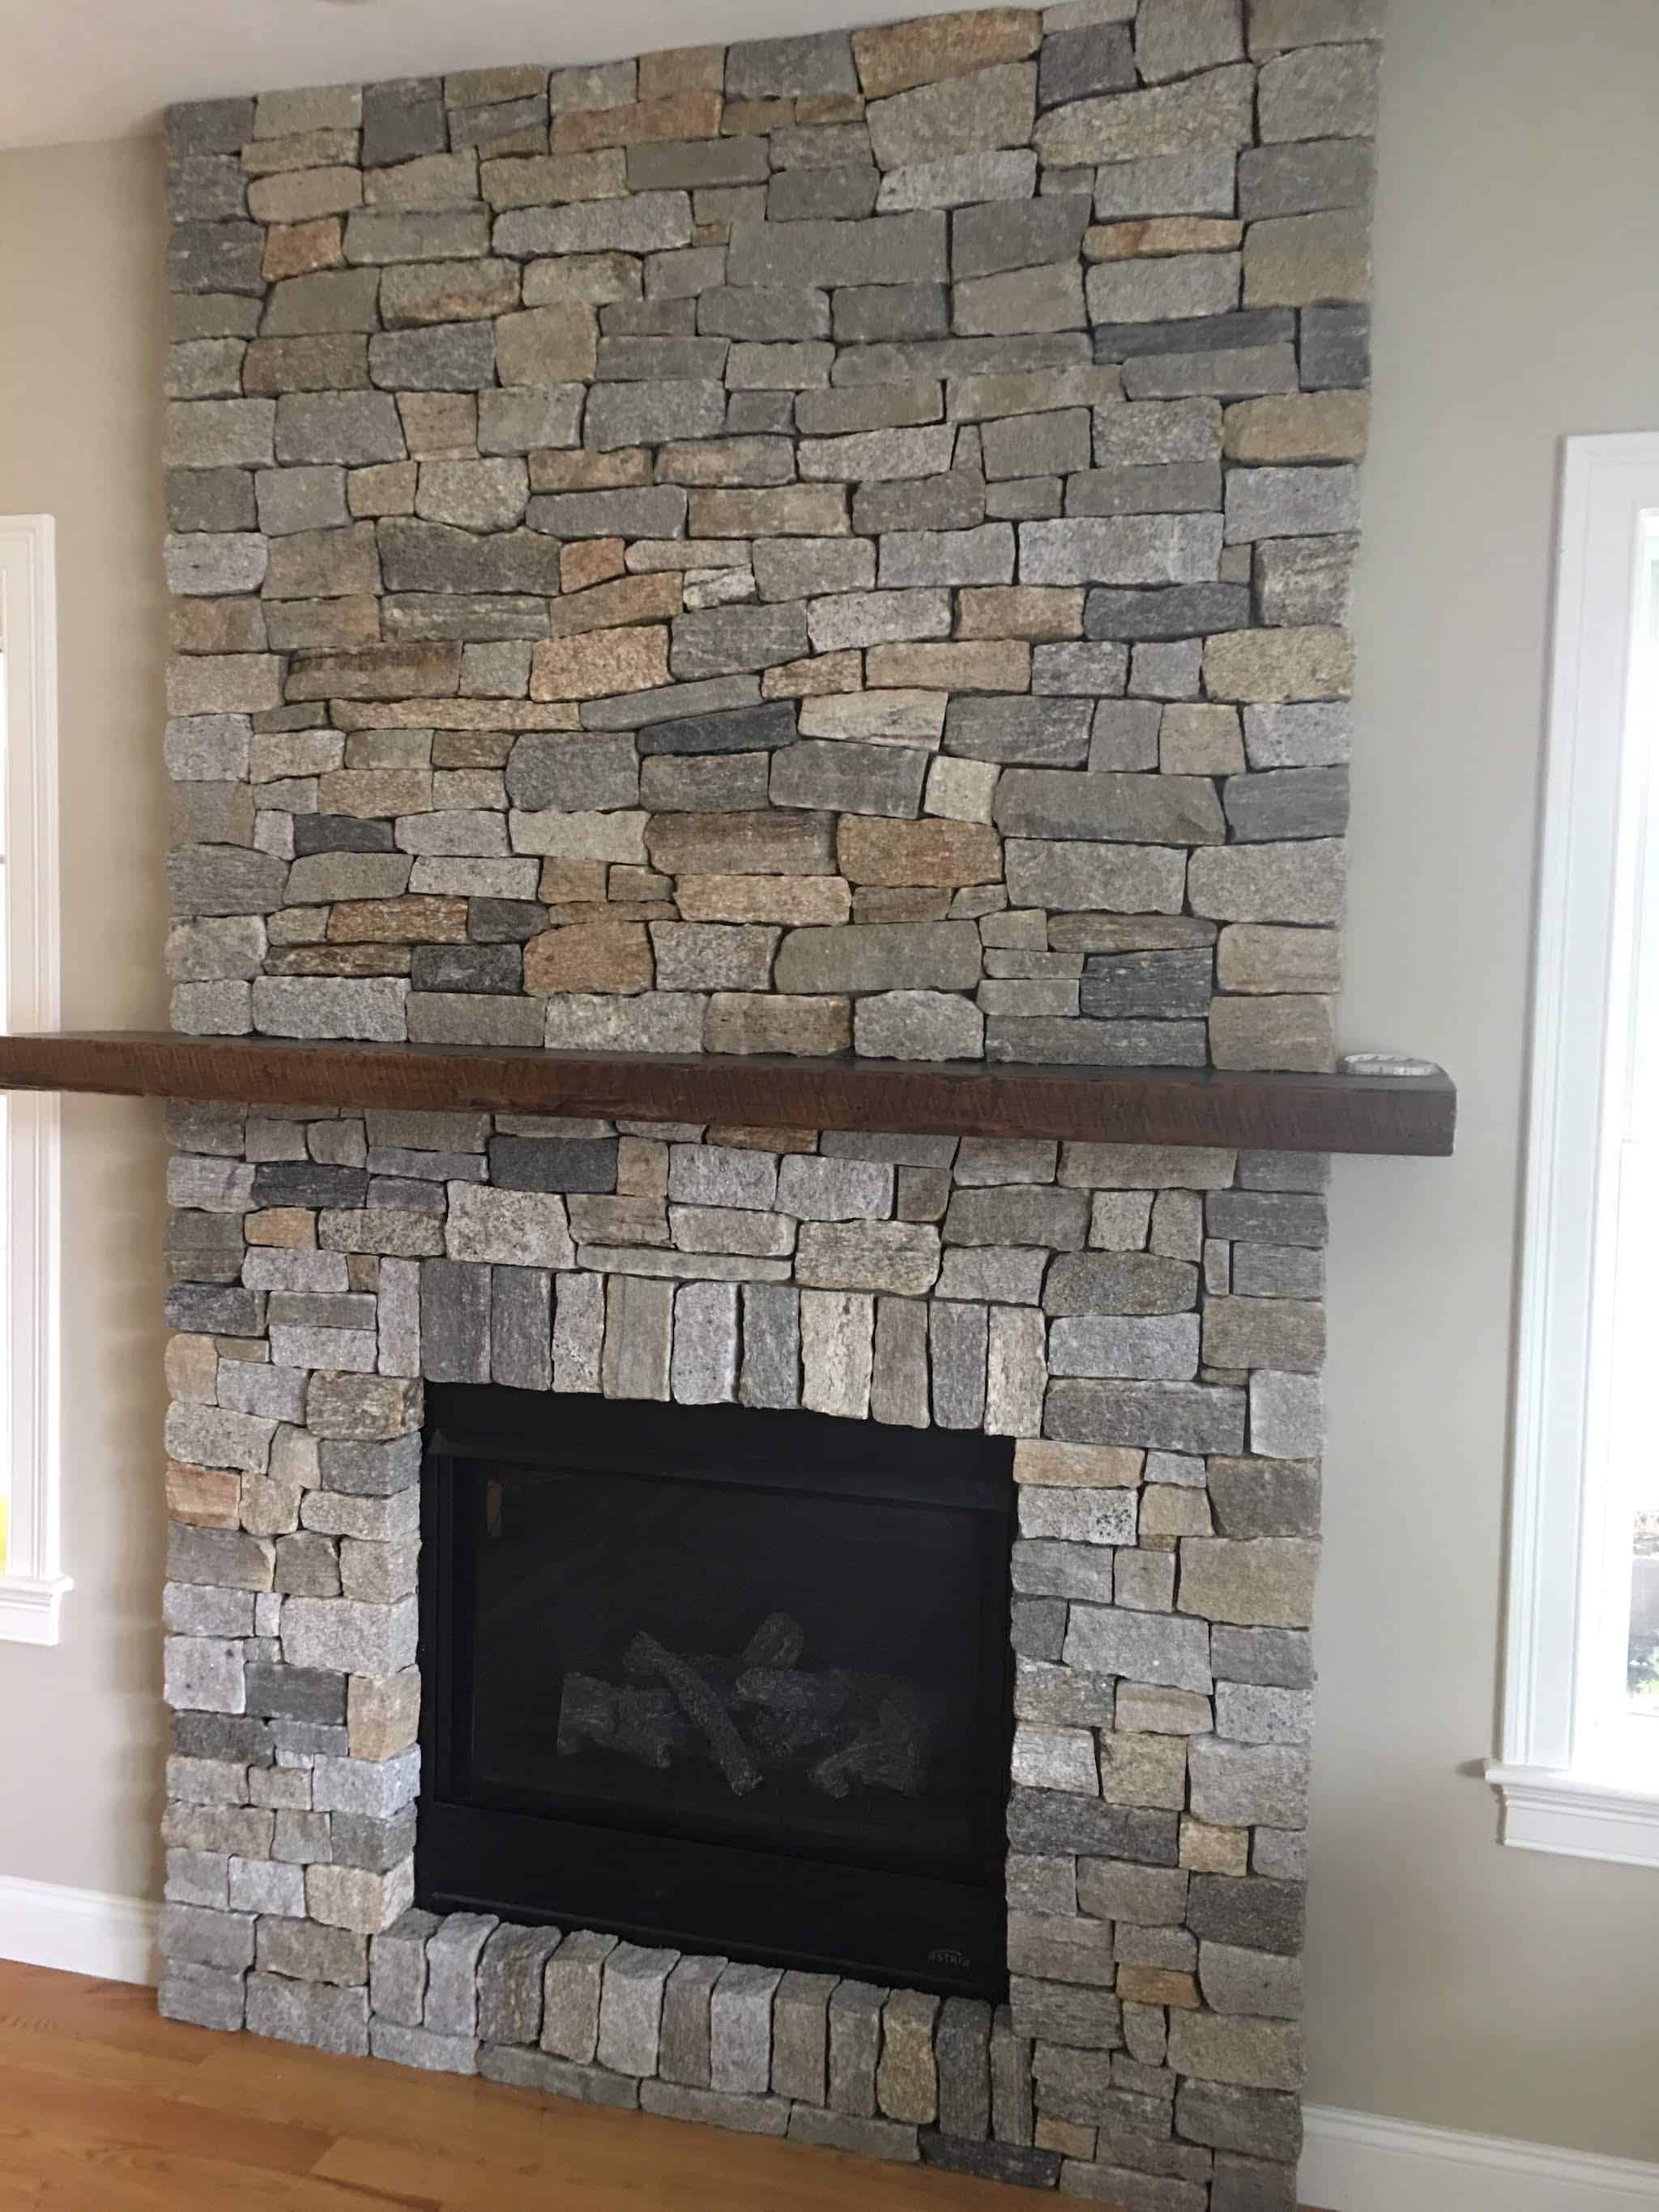 From Gas Insert To Natural Stone, Natural Stone For Fireplace Wall